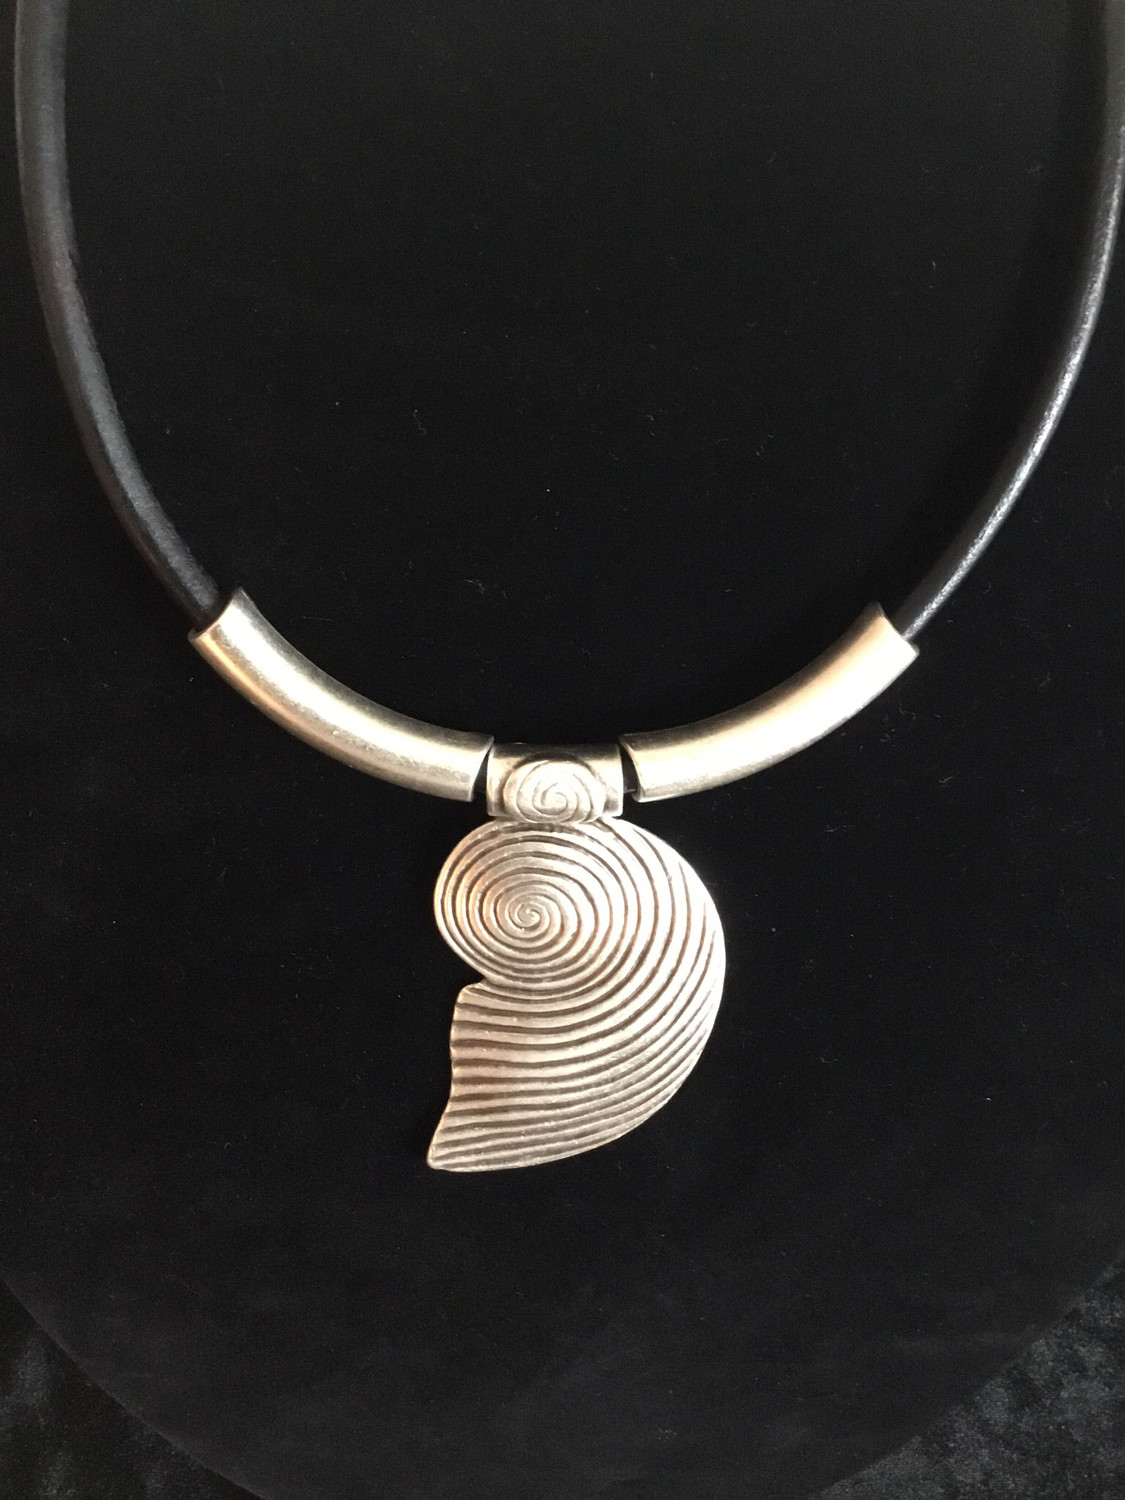 Pewter Nautilus Shell on Black leather Necklace